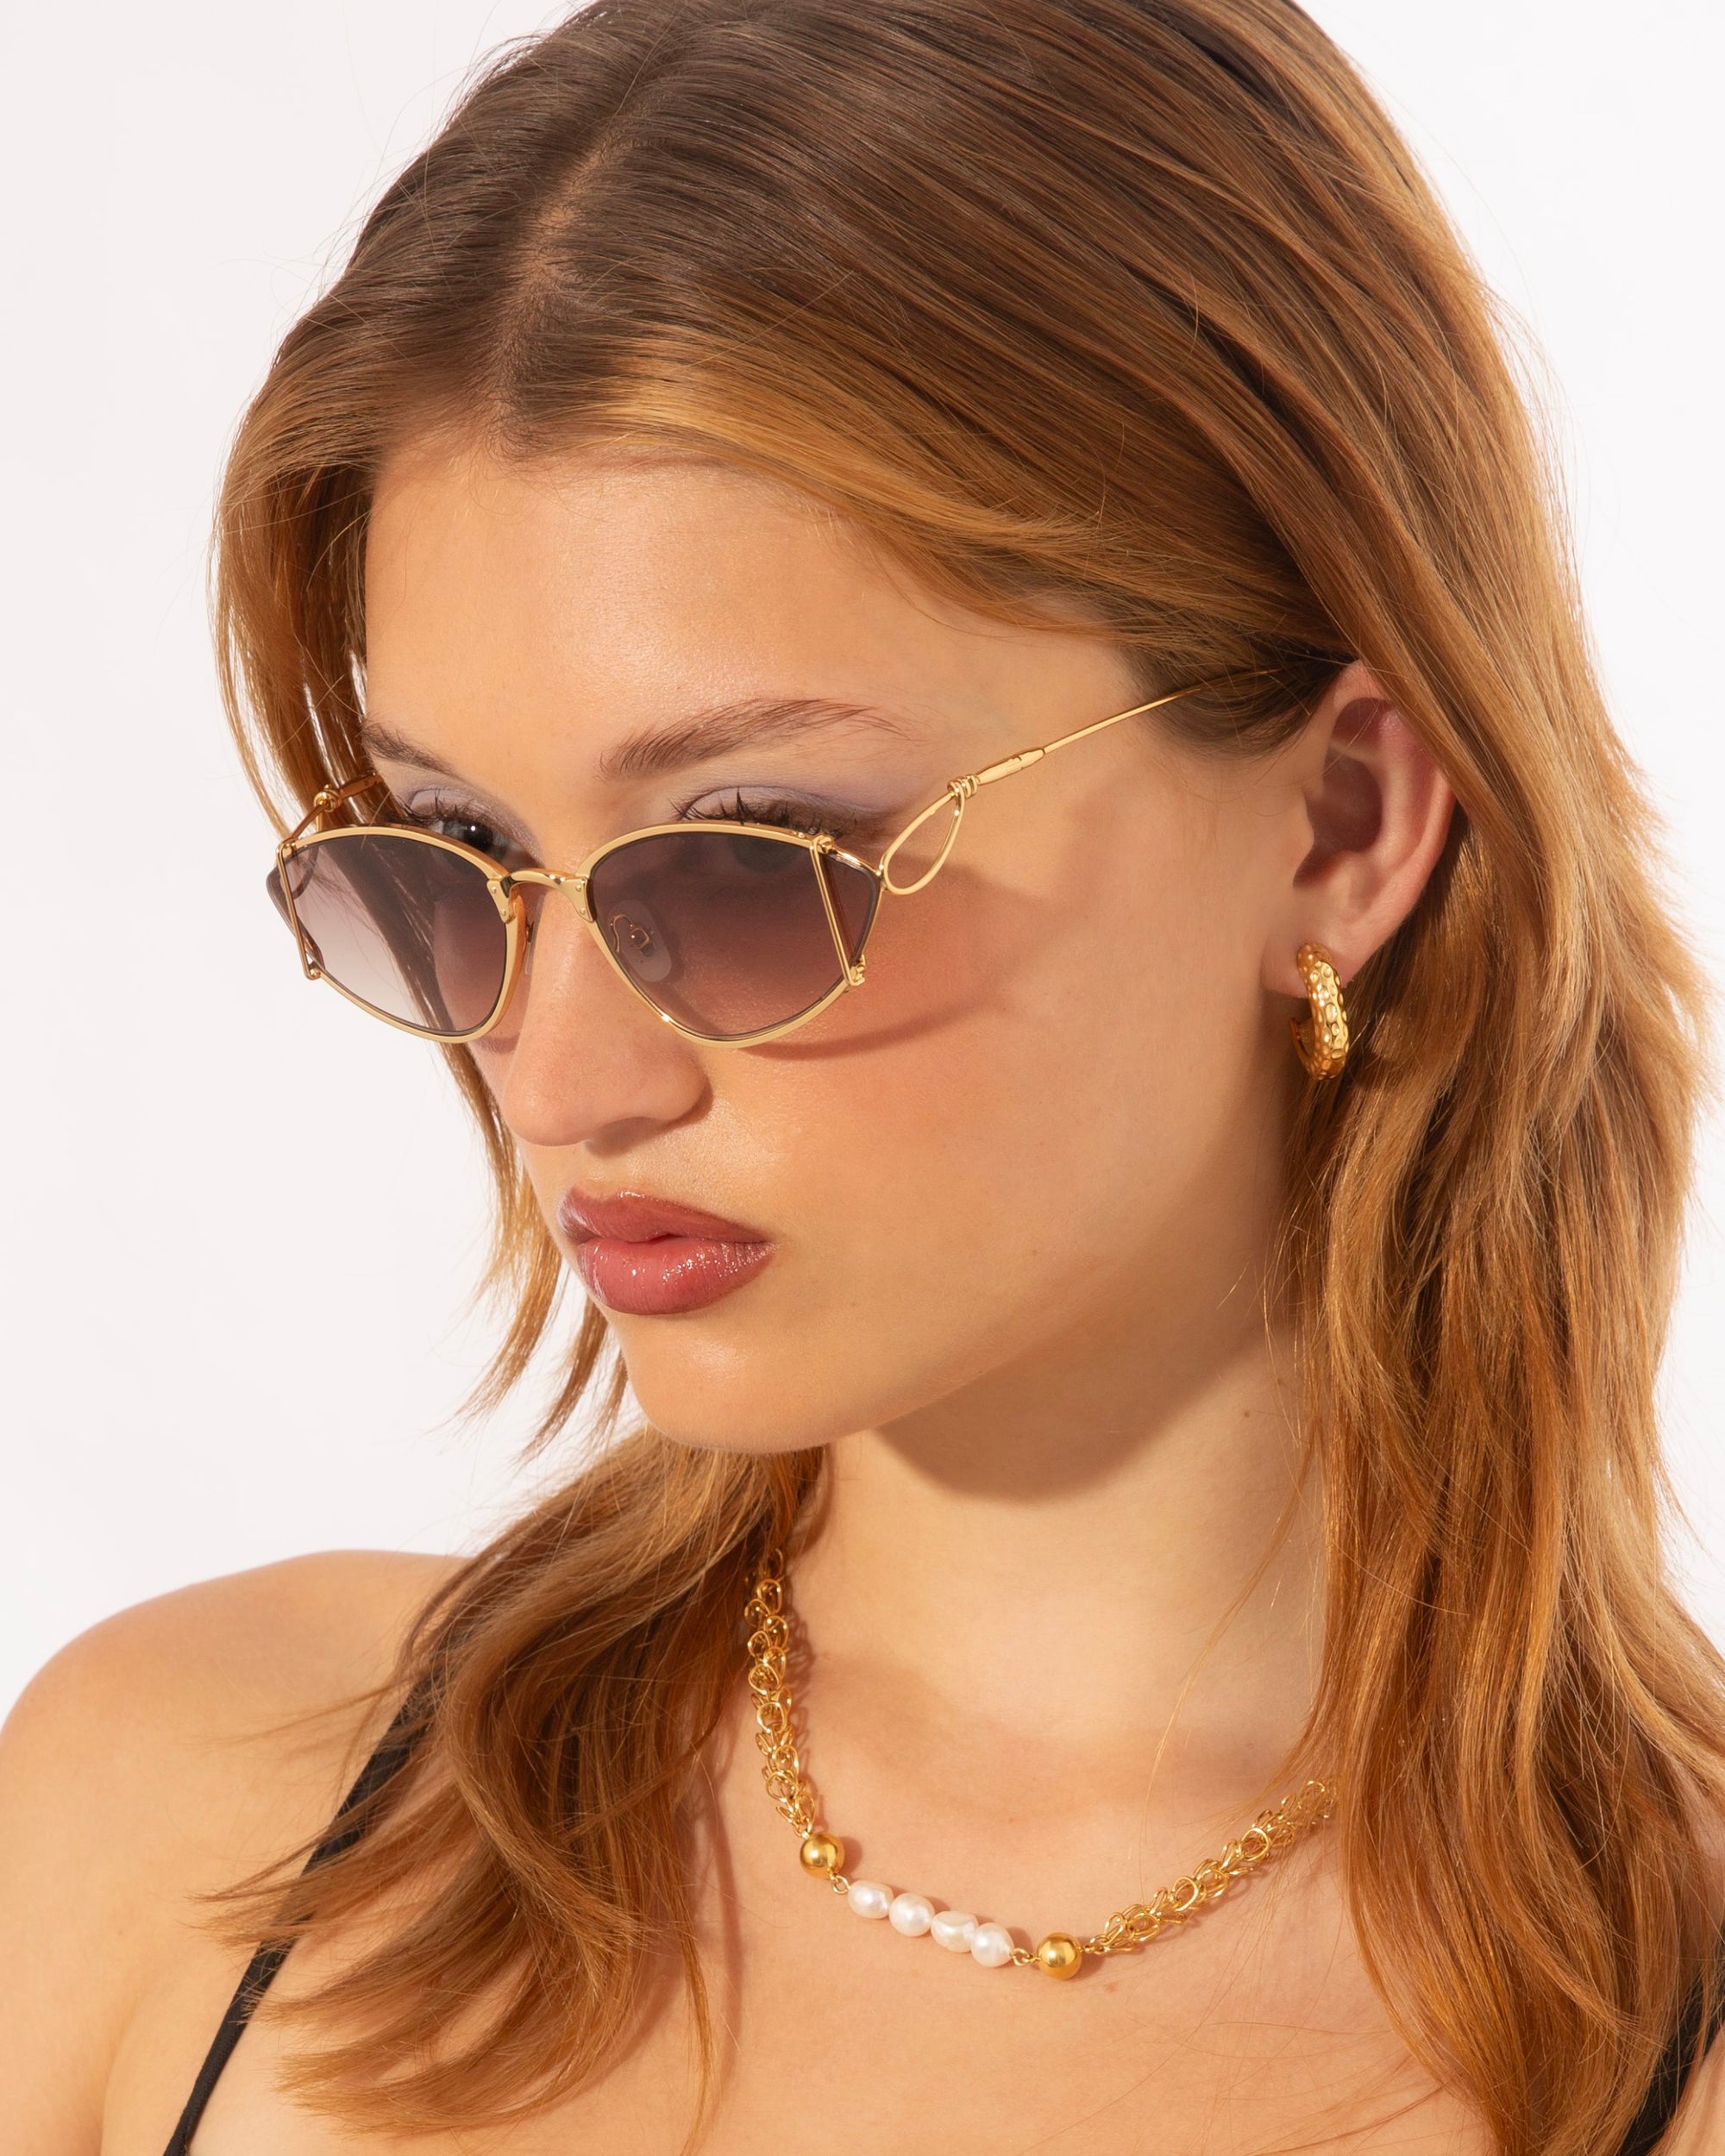 A person with long light brown hair is wearing 18-karat gold-plated, geometric For Art&#39;s Sake® Ornate sunglasses and gold jewelry, including a necklace with a mix of gold and white beads and gold hoop earrings. The individual is looking slightly down and to the side against a white background.